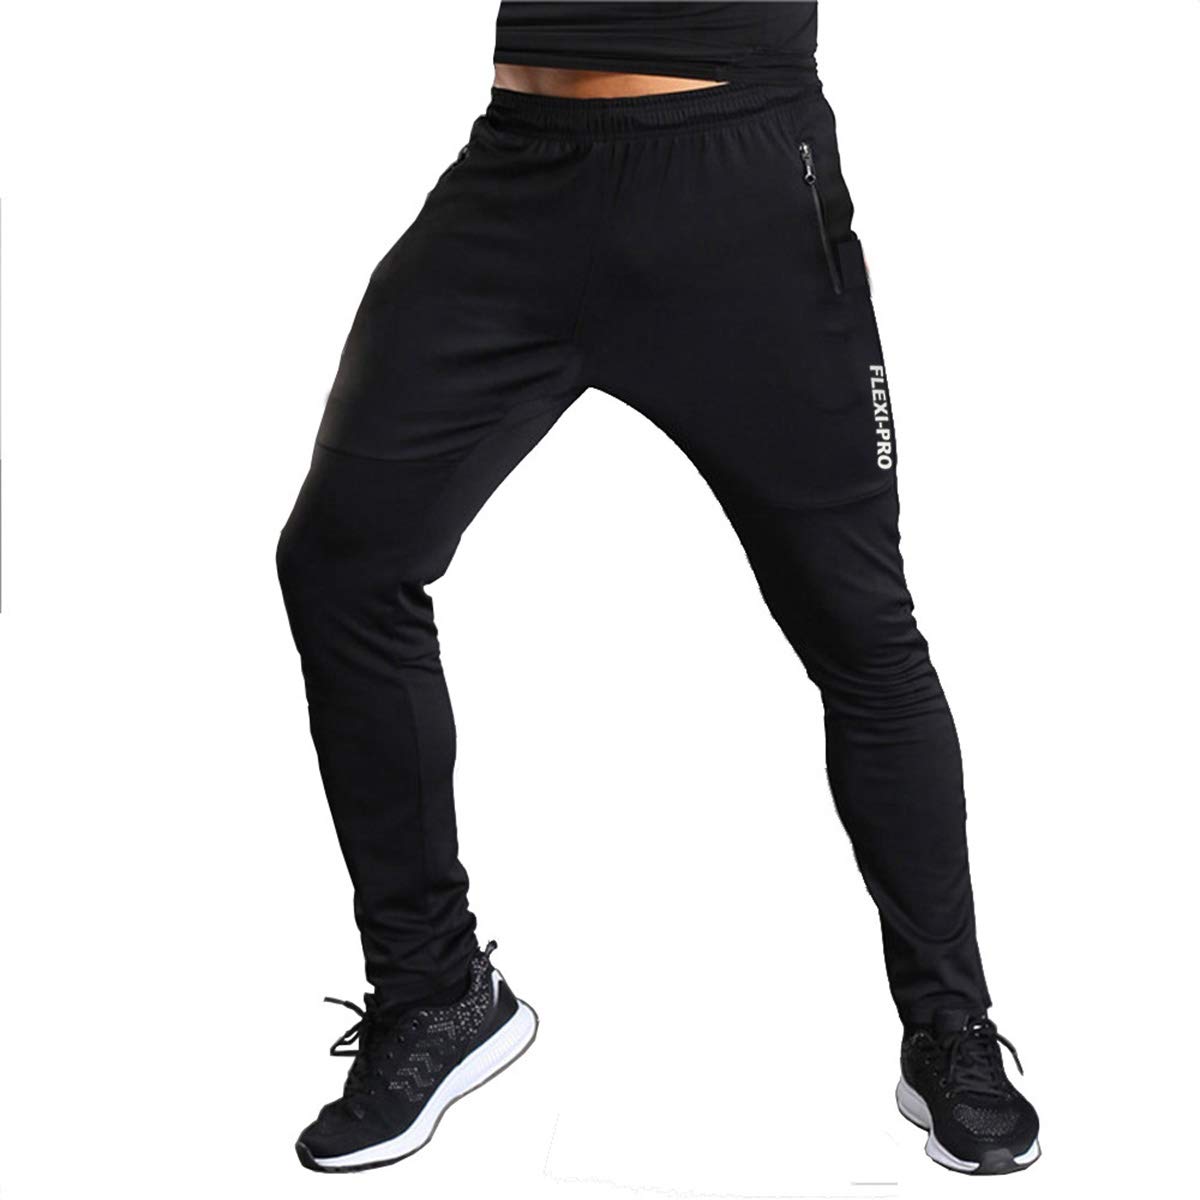 Zesteez Men Ultra Stretchable Gym-Workout Track Pants in Fabric